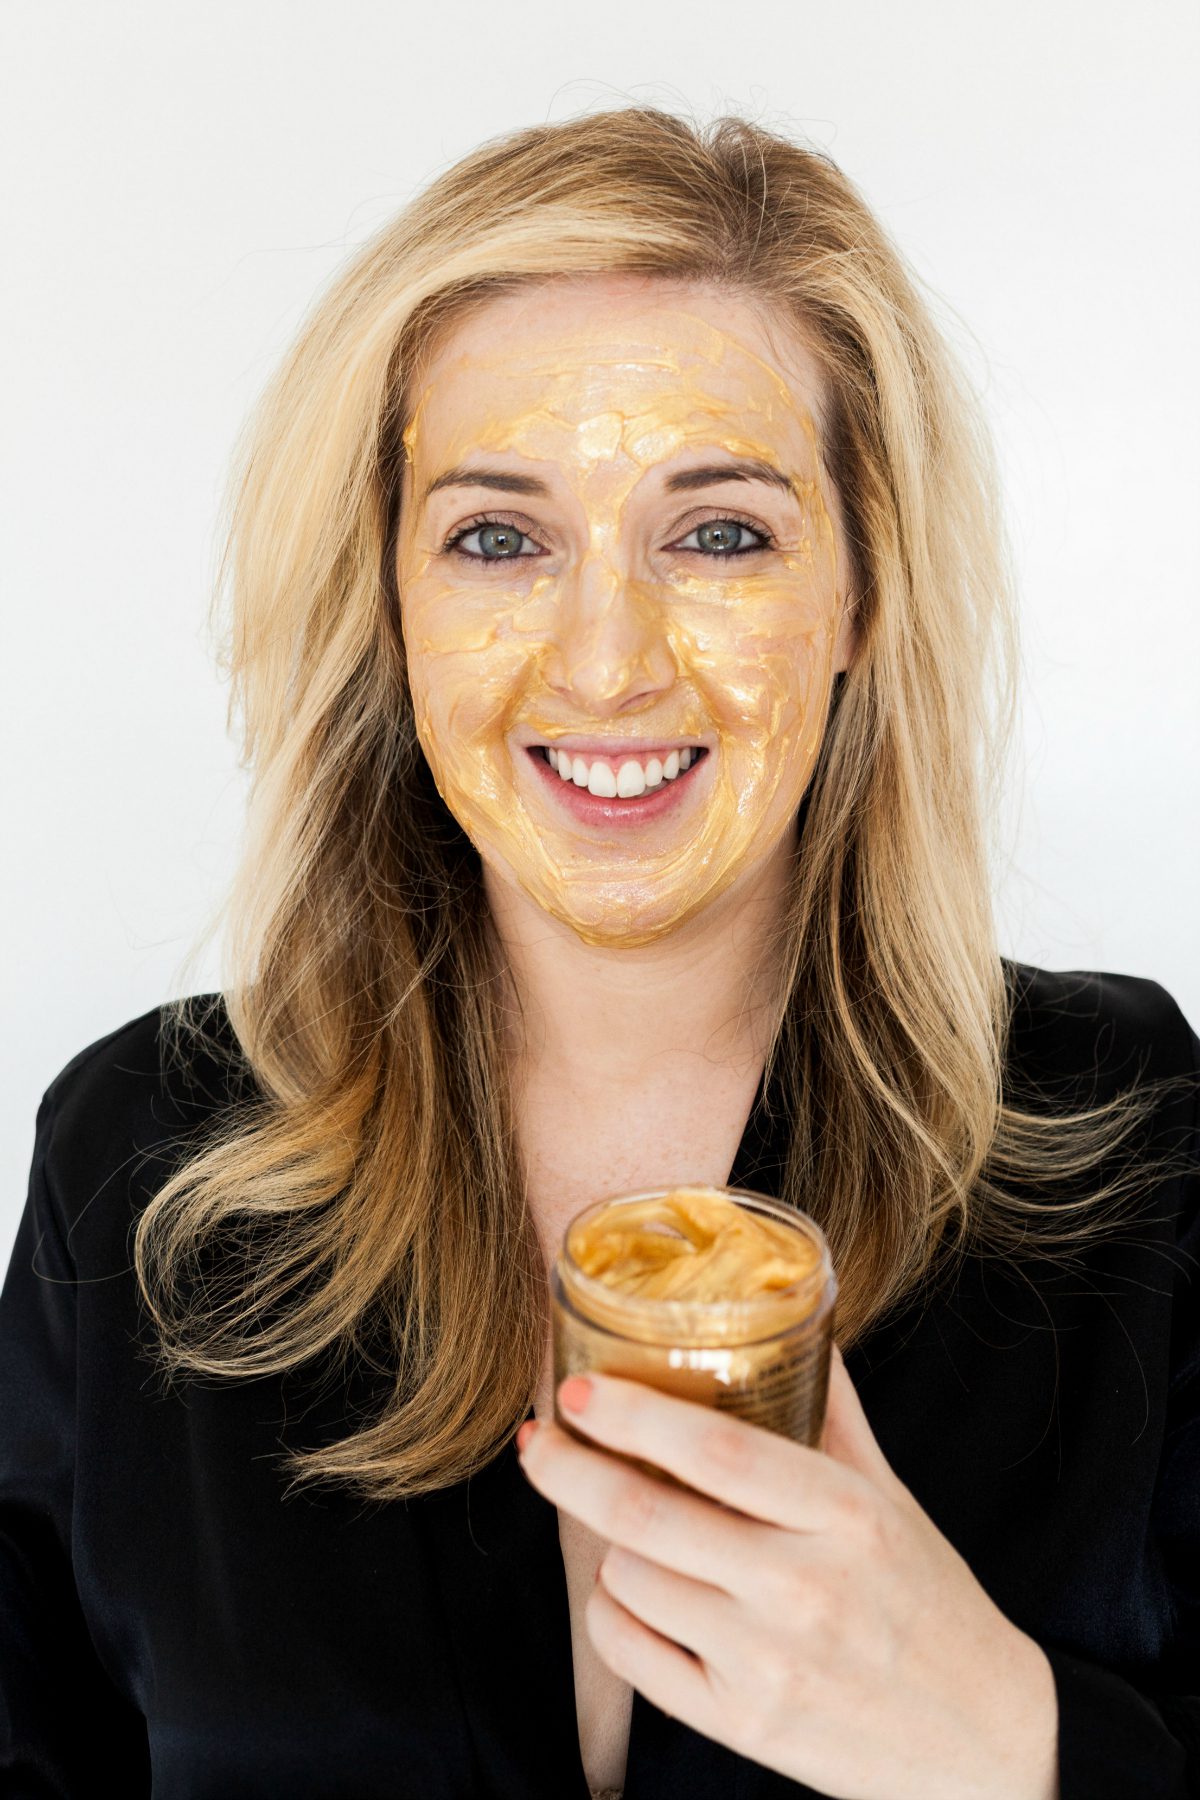 woman holding a tub of Gold Face Mask